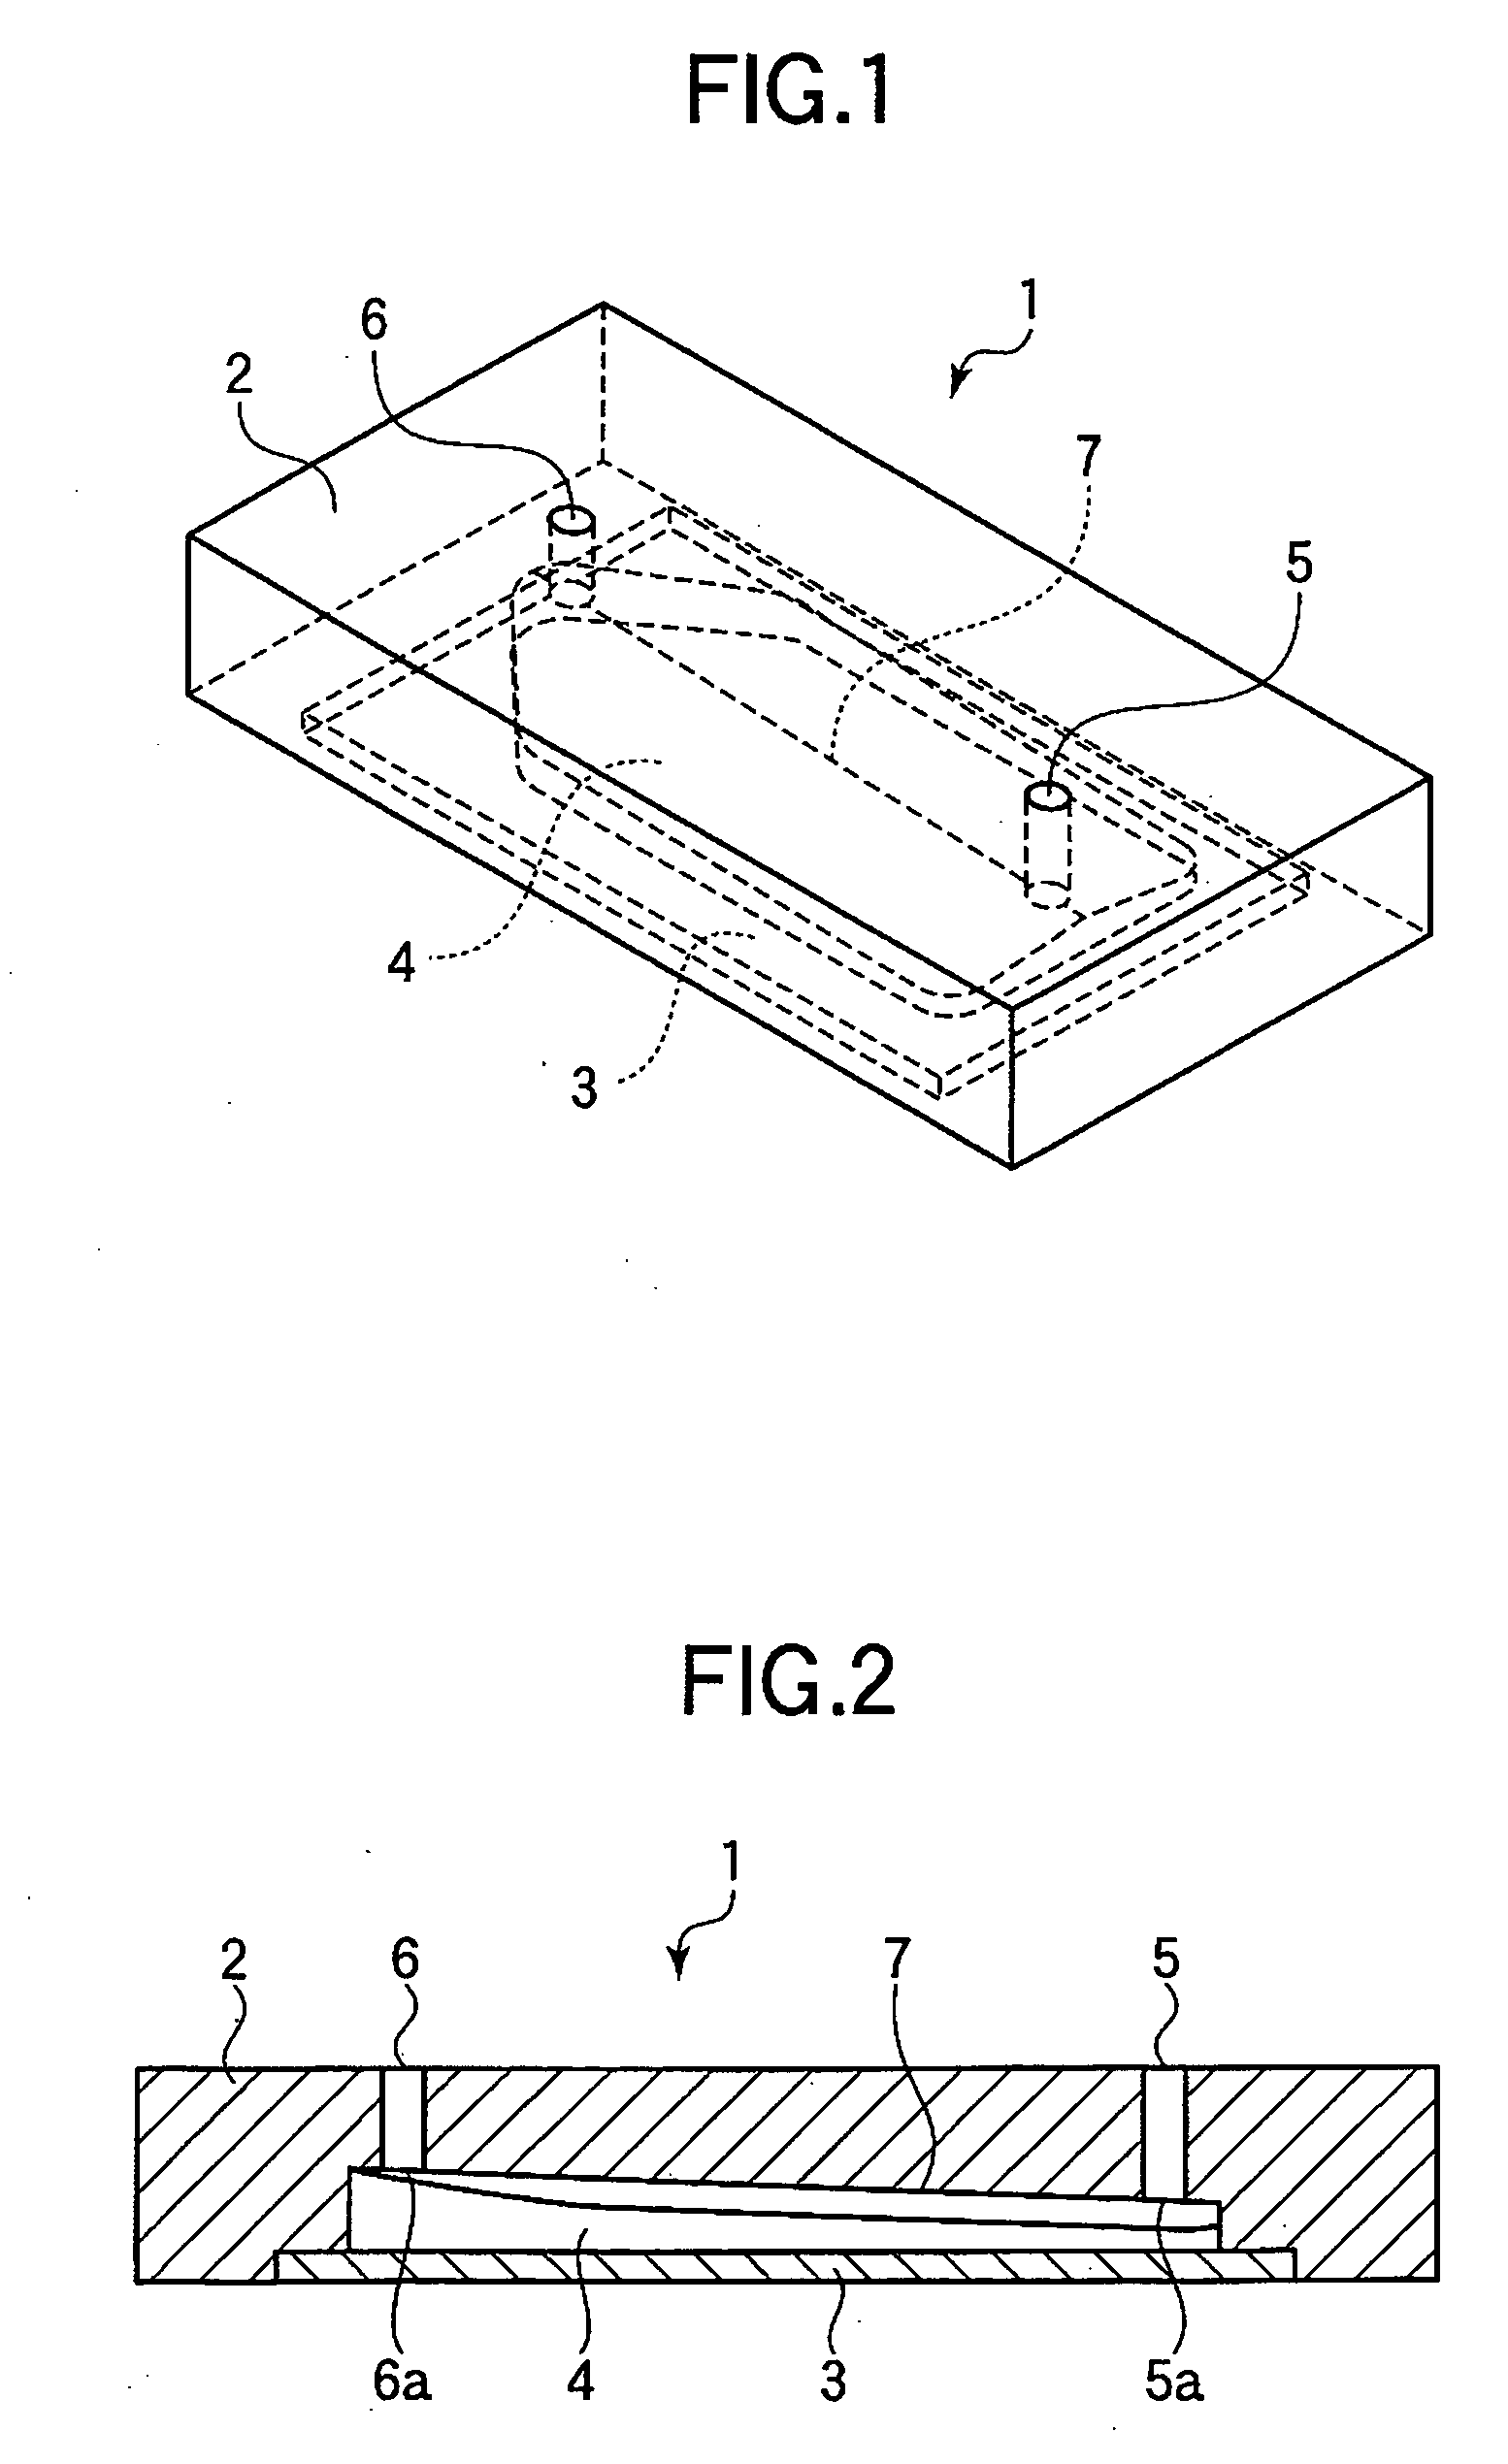 Biochemical reaction cassette with improved liquid filling performance